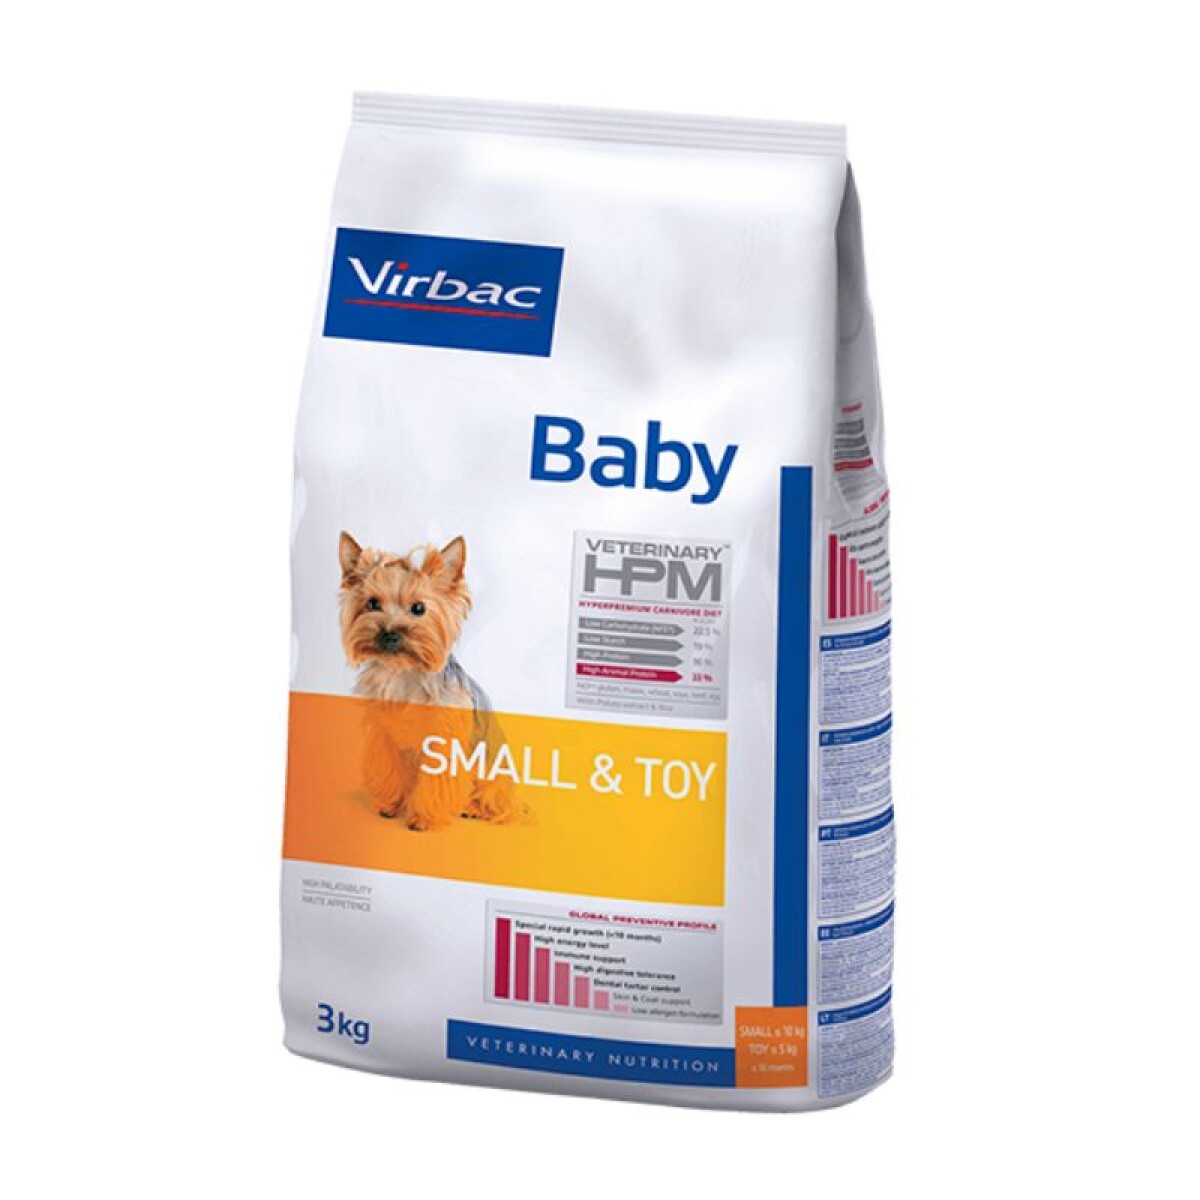 HPM DOG BABY SMALL & TOY 3KG - Hpm Dog Baby Small & Toy 3kg 